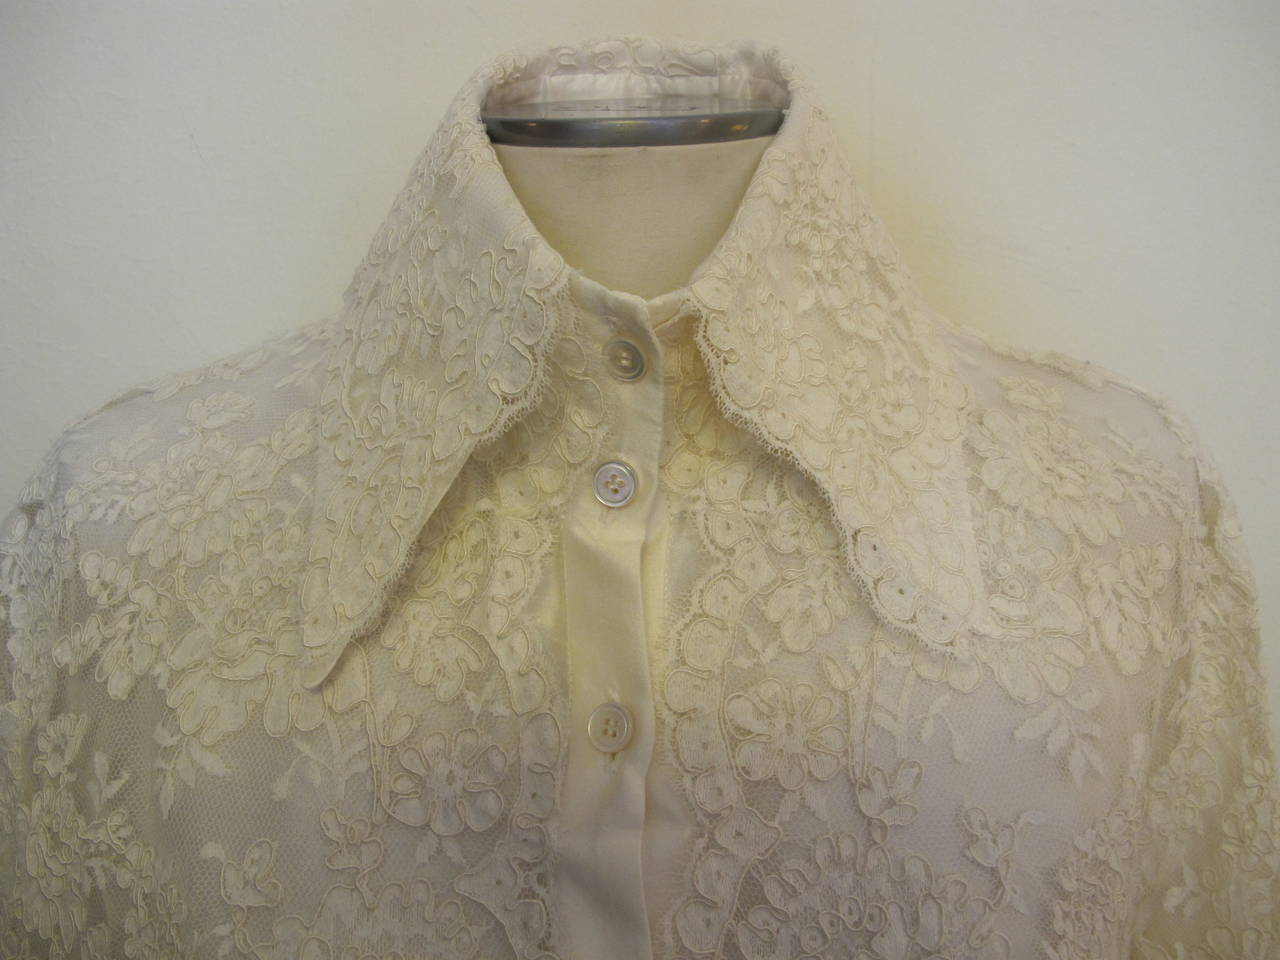 Valentino New Elegant Lace Blouse In Excellent Condition For Sale In San Francisco, CA